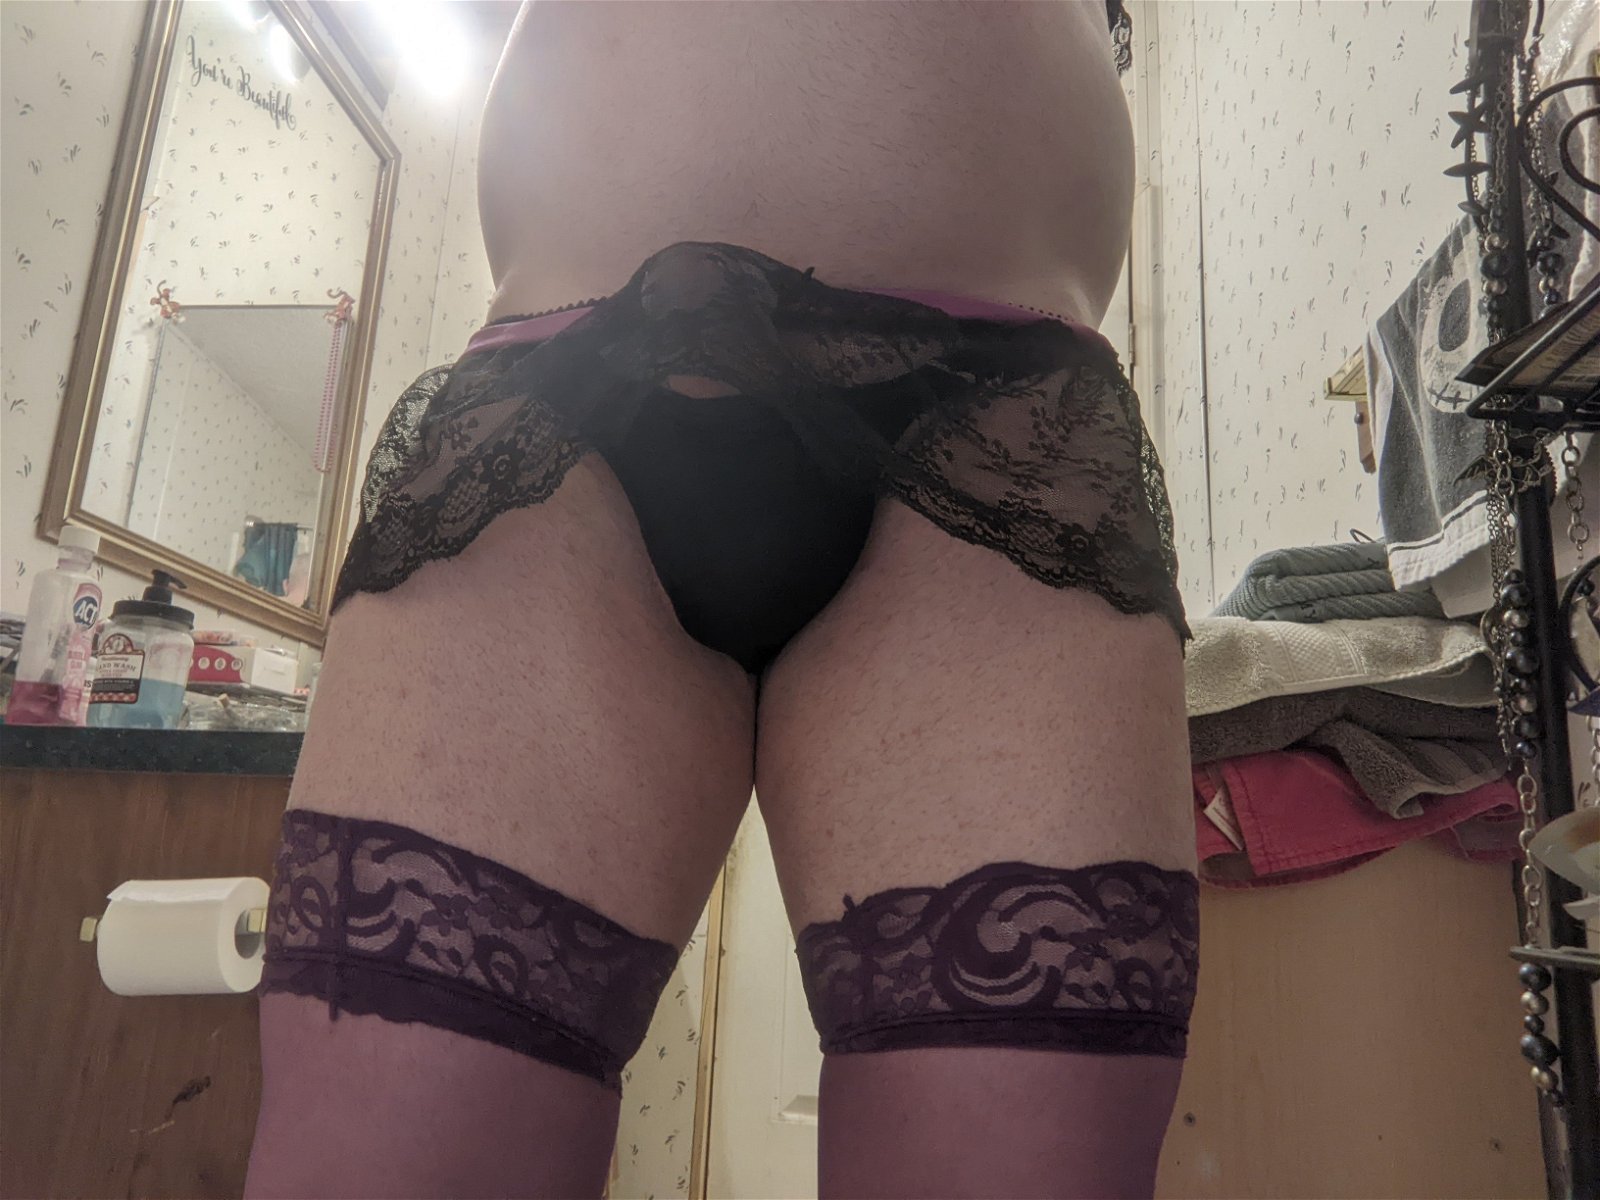 Watch the Photo by SouthwestPantyBoy with the username @SouthwestPantyBoy, posted on February 6, 2022. The post is about the topic crossdressers in nylons. and the text says 'gotta have me aome purple thigh high time🥳🎉👠💕💦'